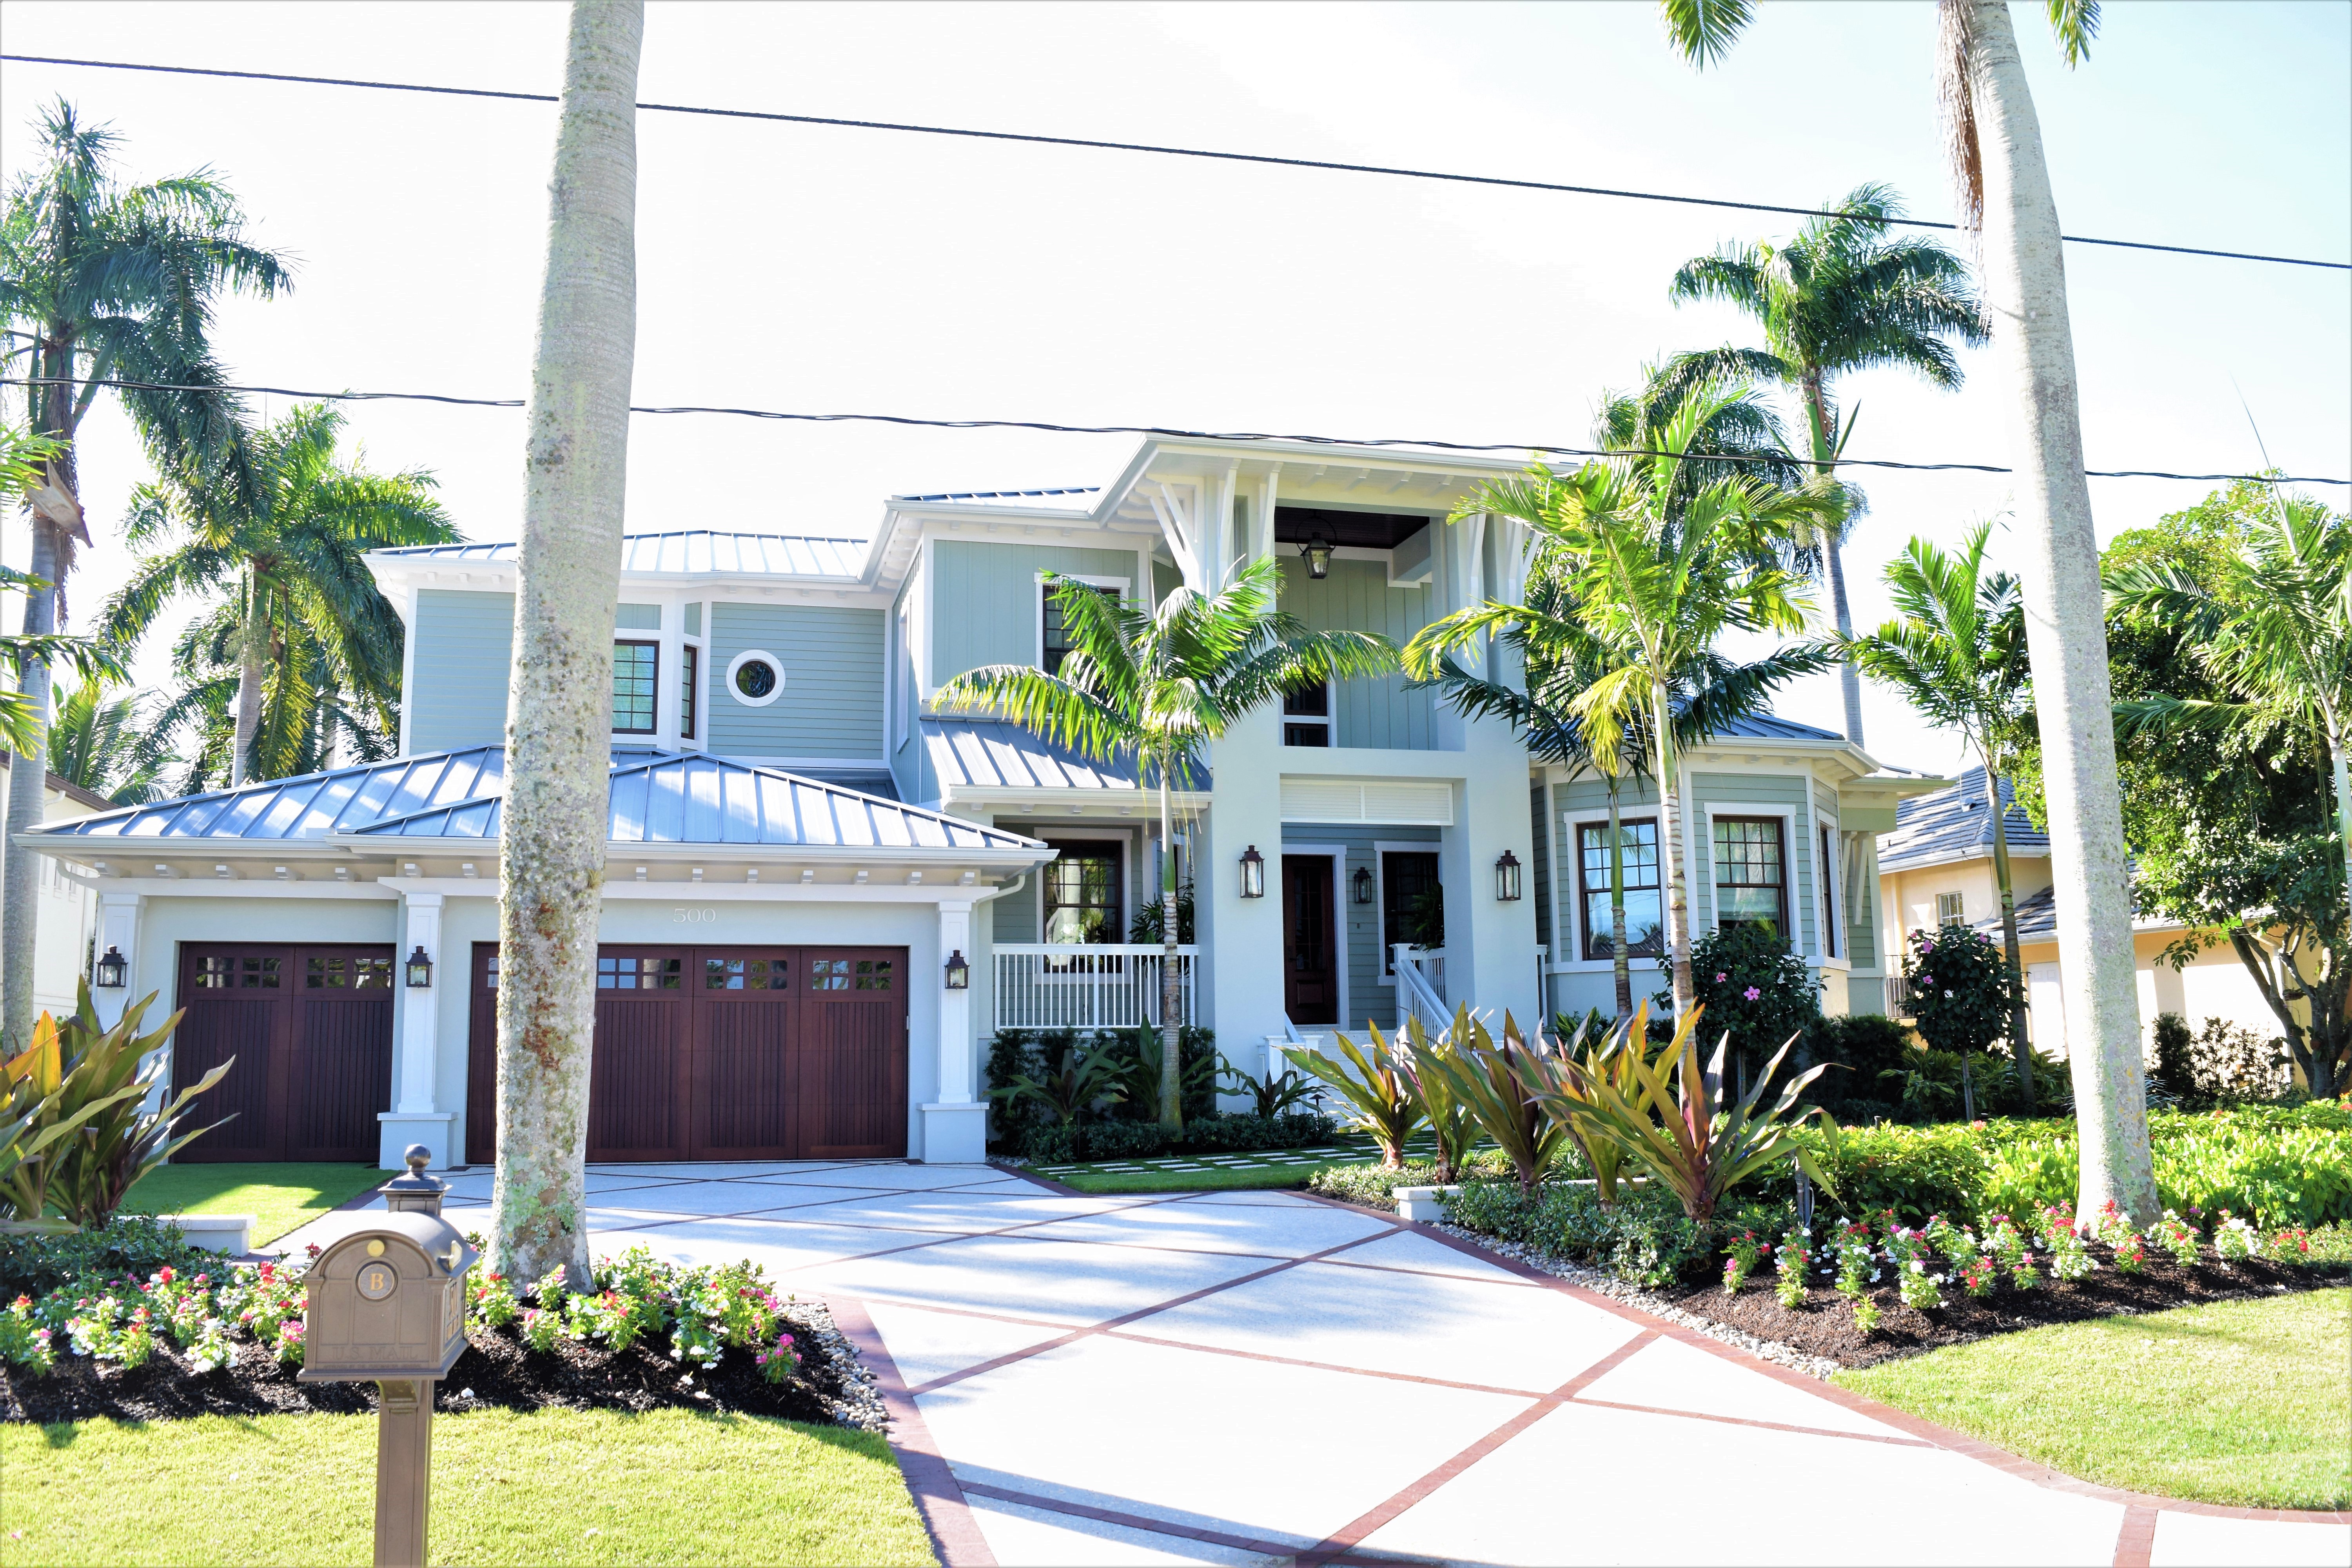 Residential Property Management in and near Bonita Springs Florida